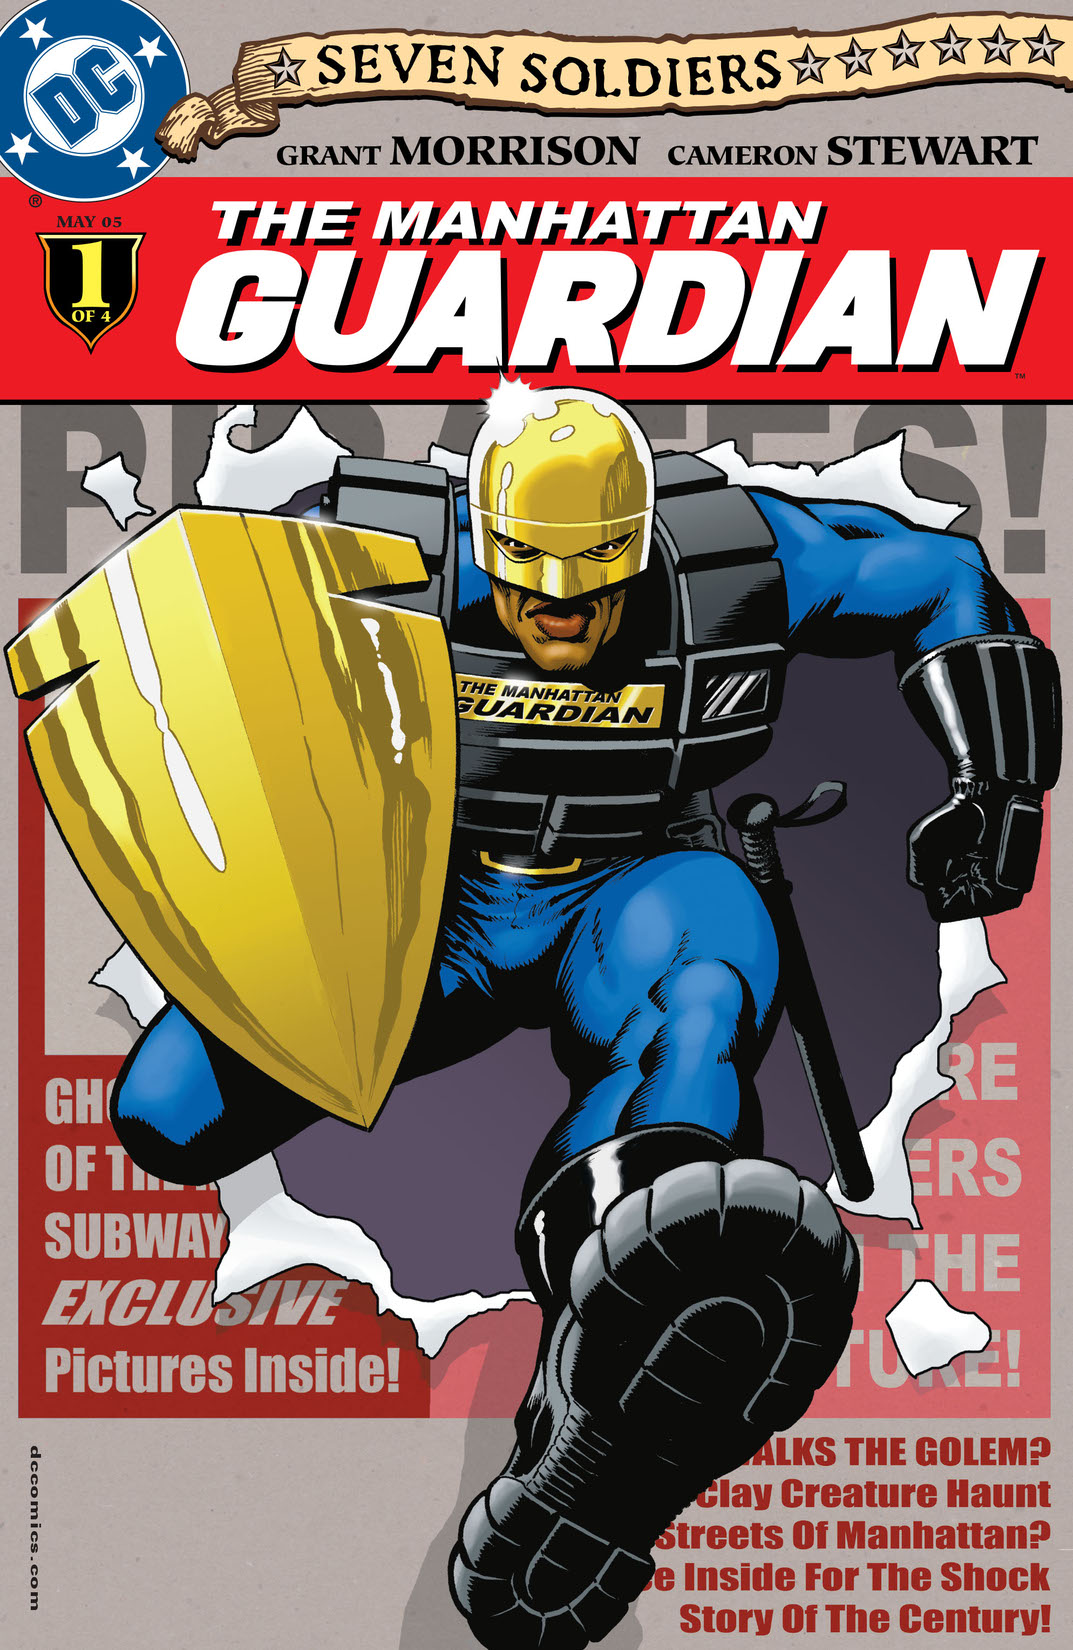 Seven Soldiers: The Manhattan Guardian #1 preview images